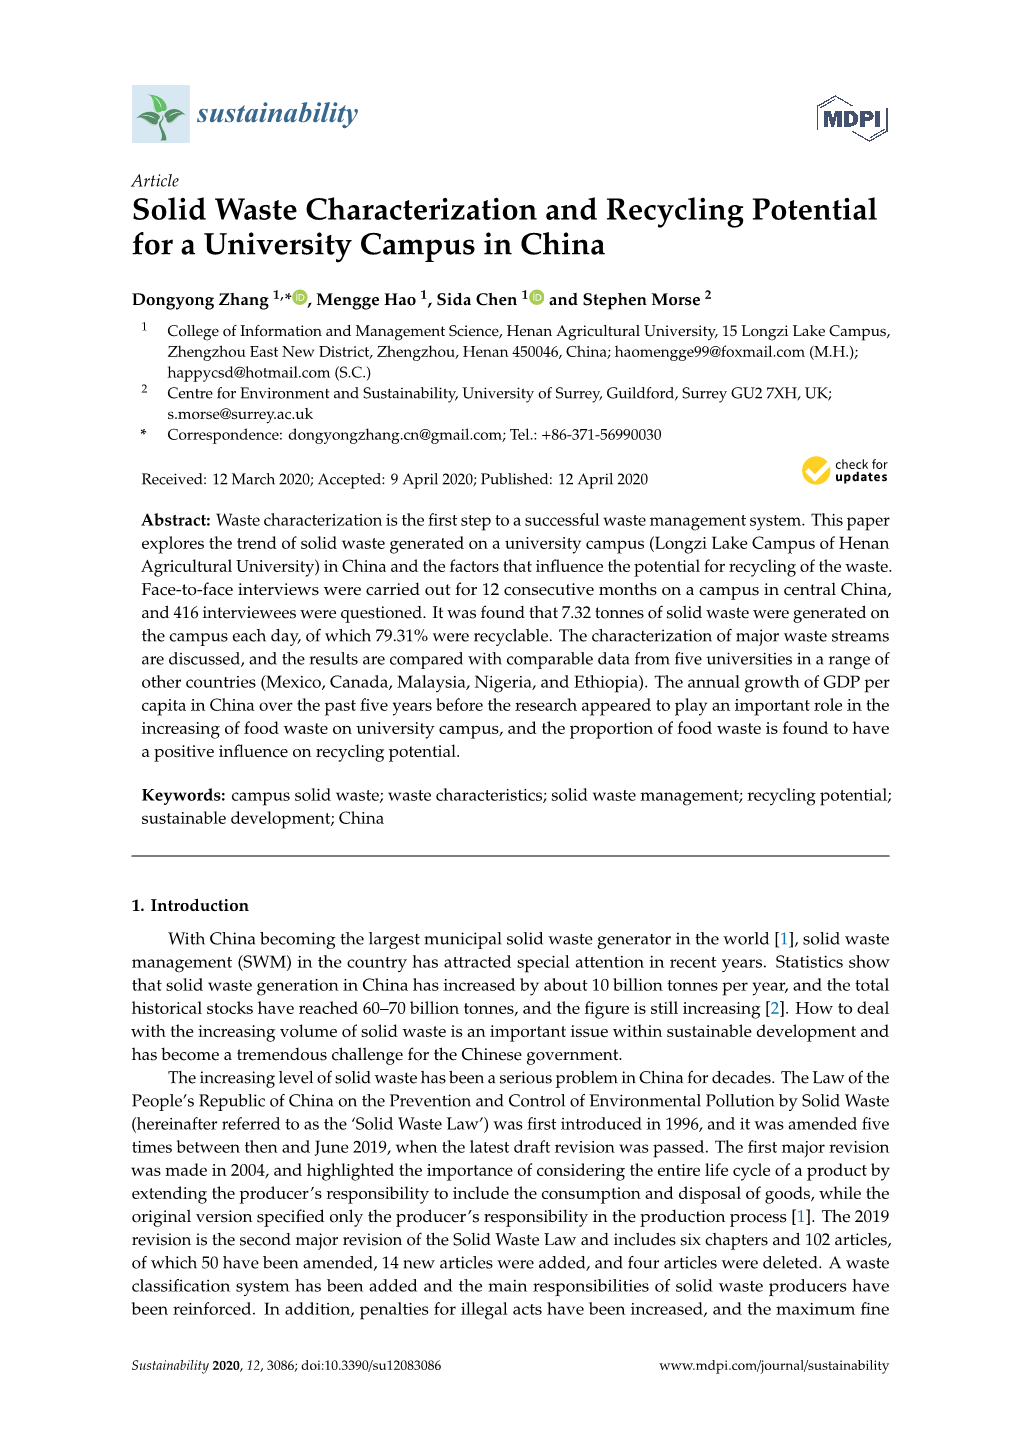 Solid Waste Characterization and Recycling Potential for a University Campus in China